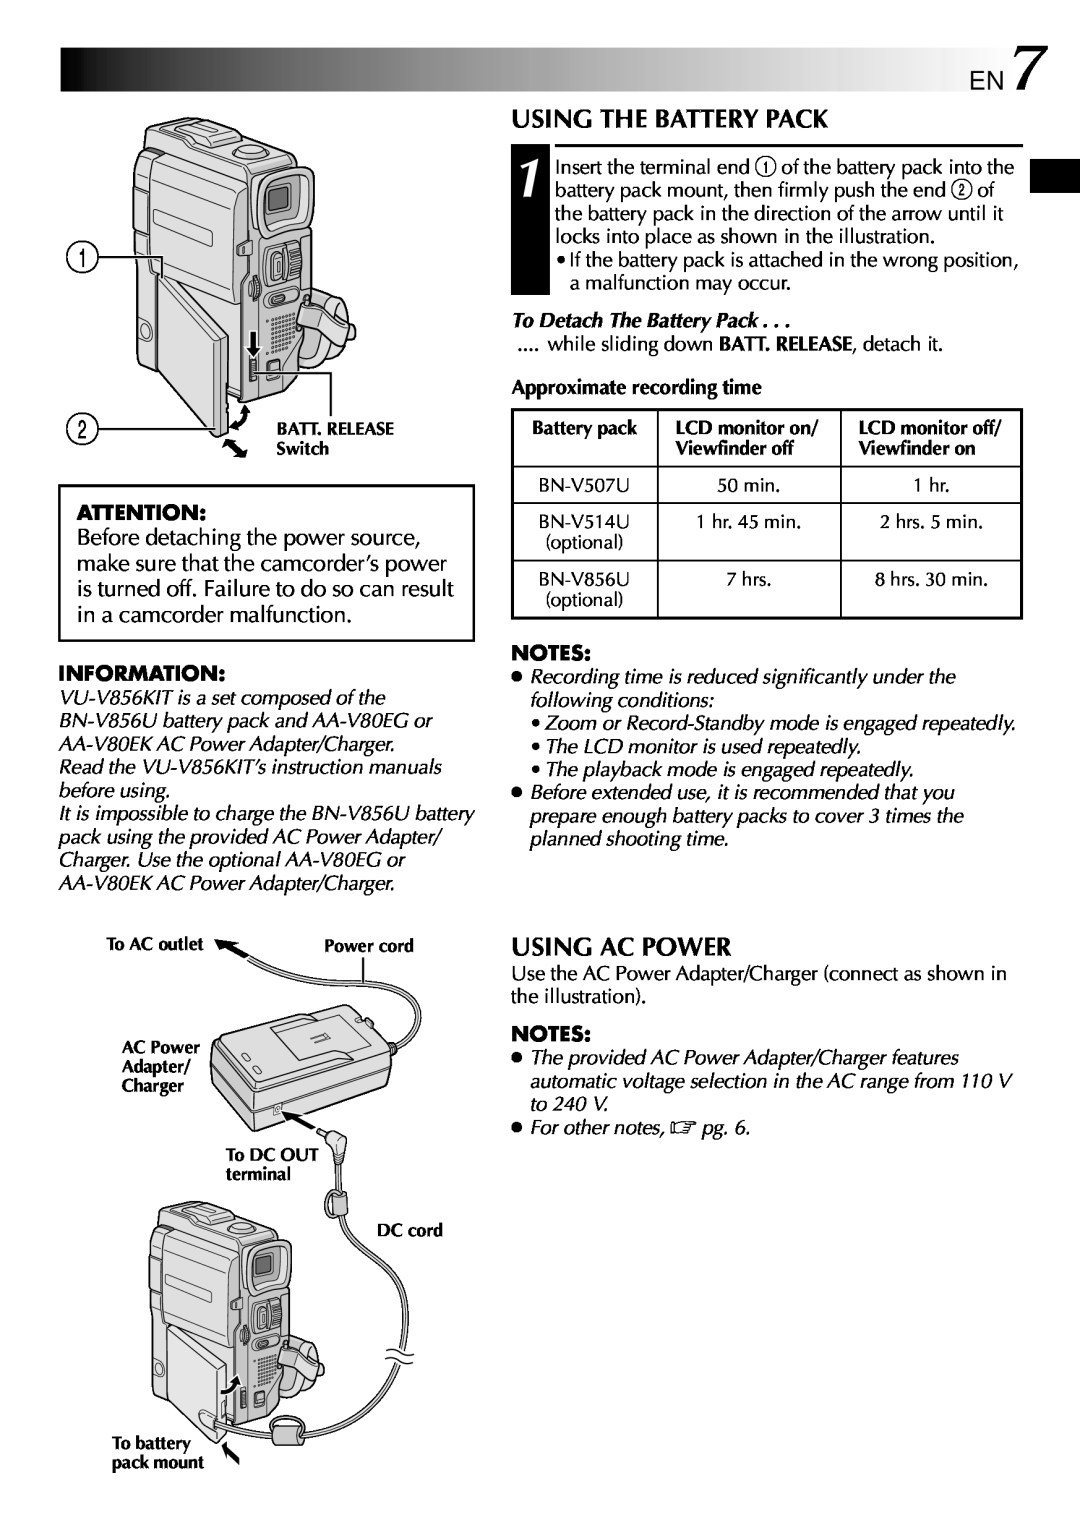 JVC GR-DVX10 specifications Using The Battery Pack, Using Ac Power, To Detach The Battery Pack 